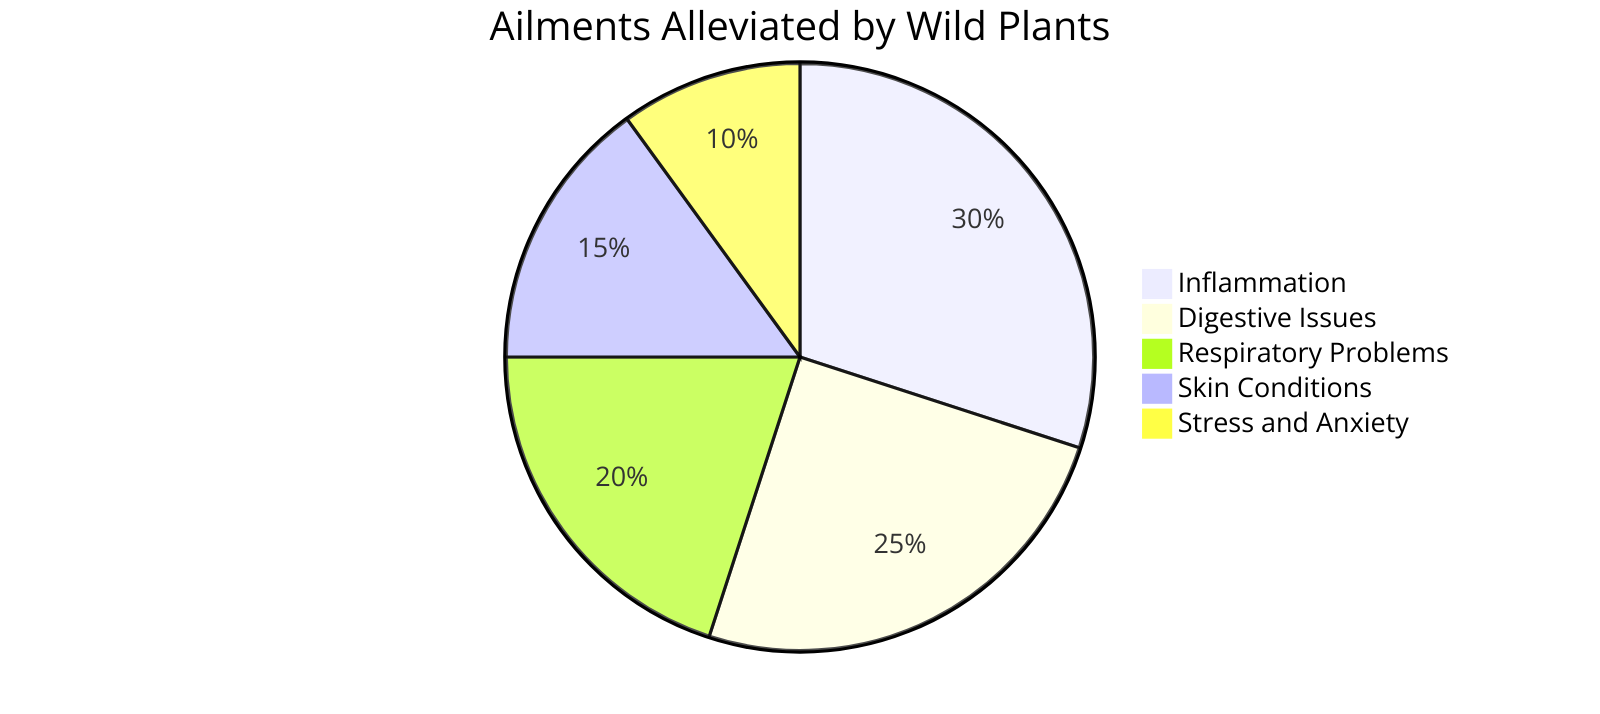  the percentage of common ailments that can be alleviated by wild plants